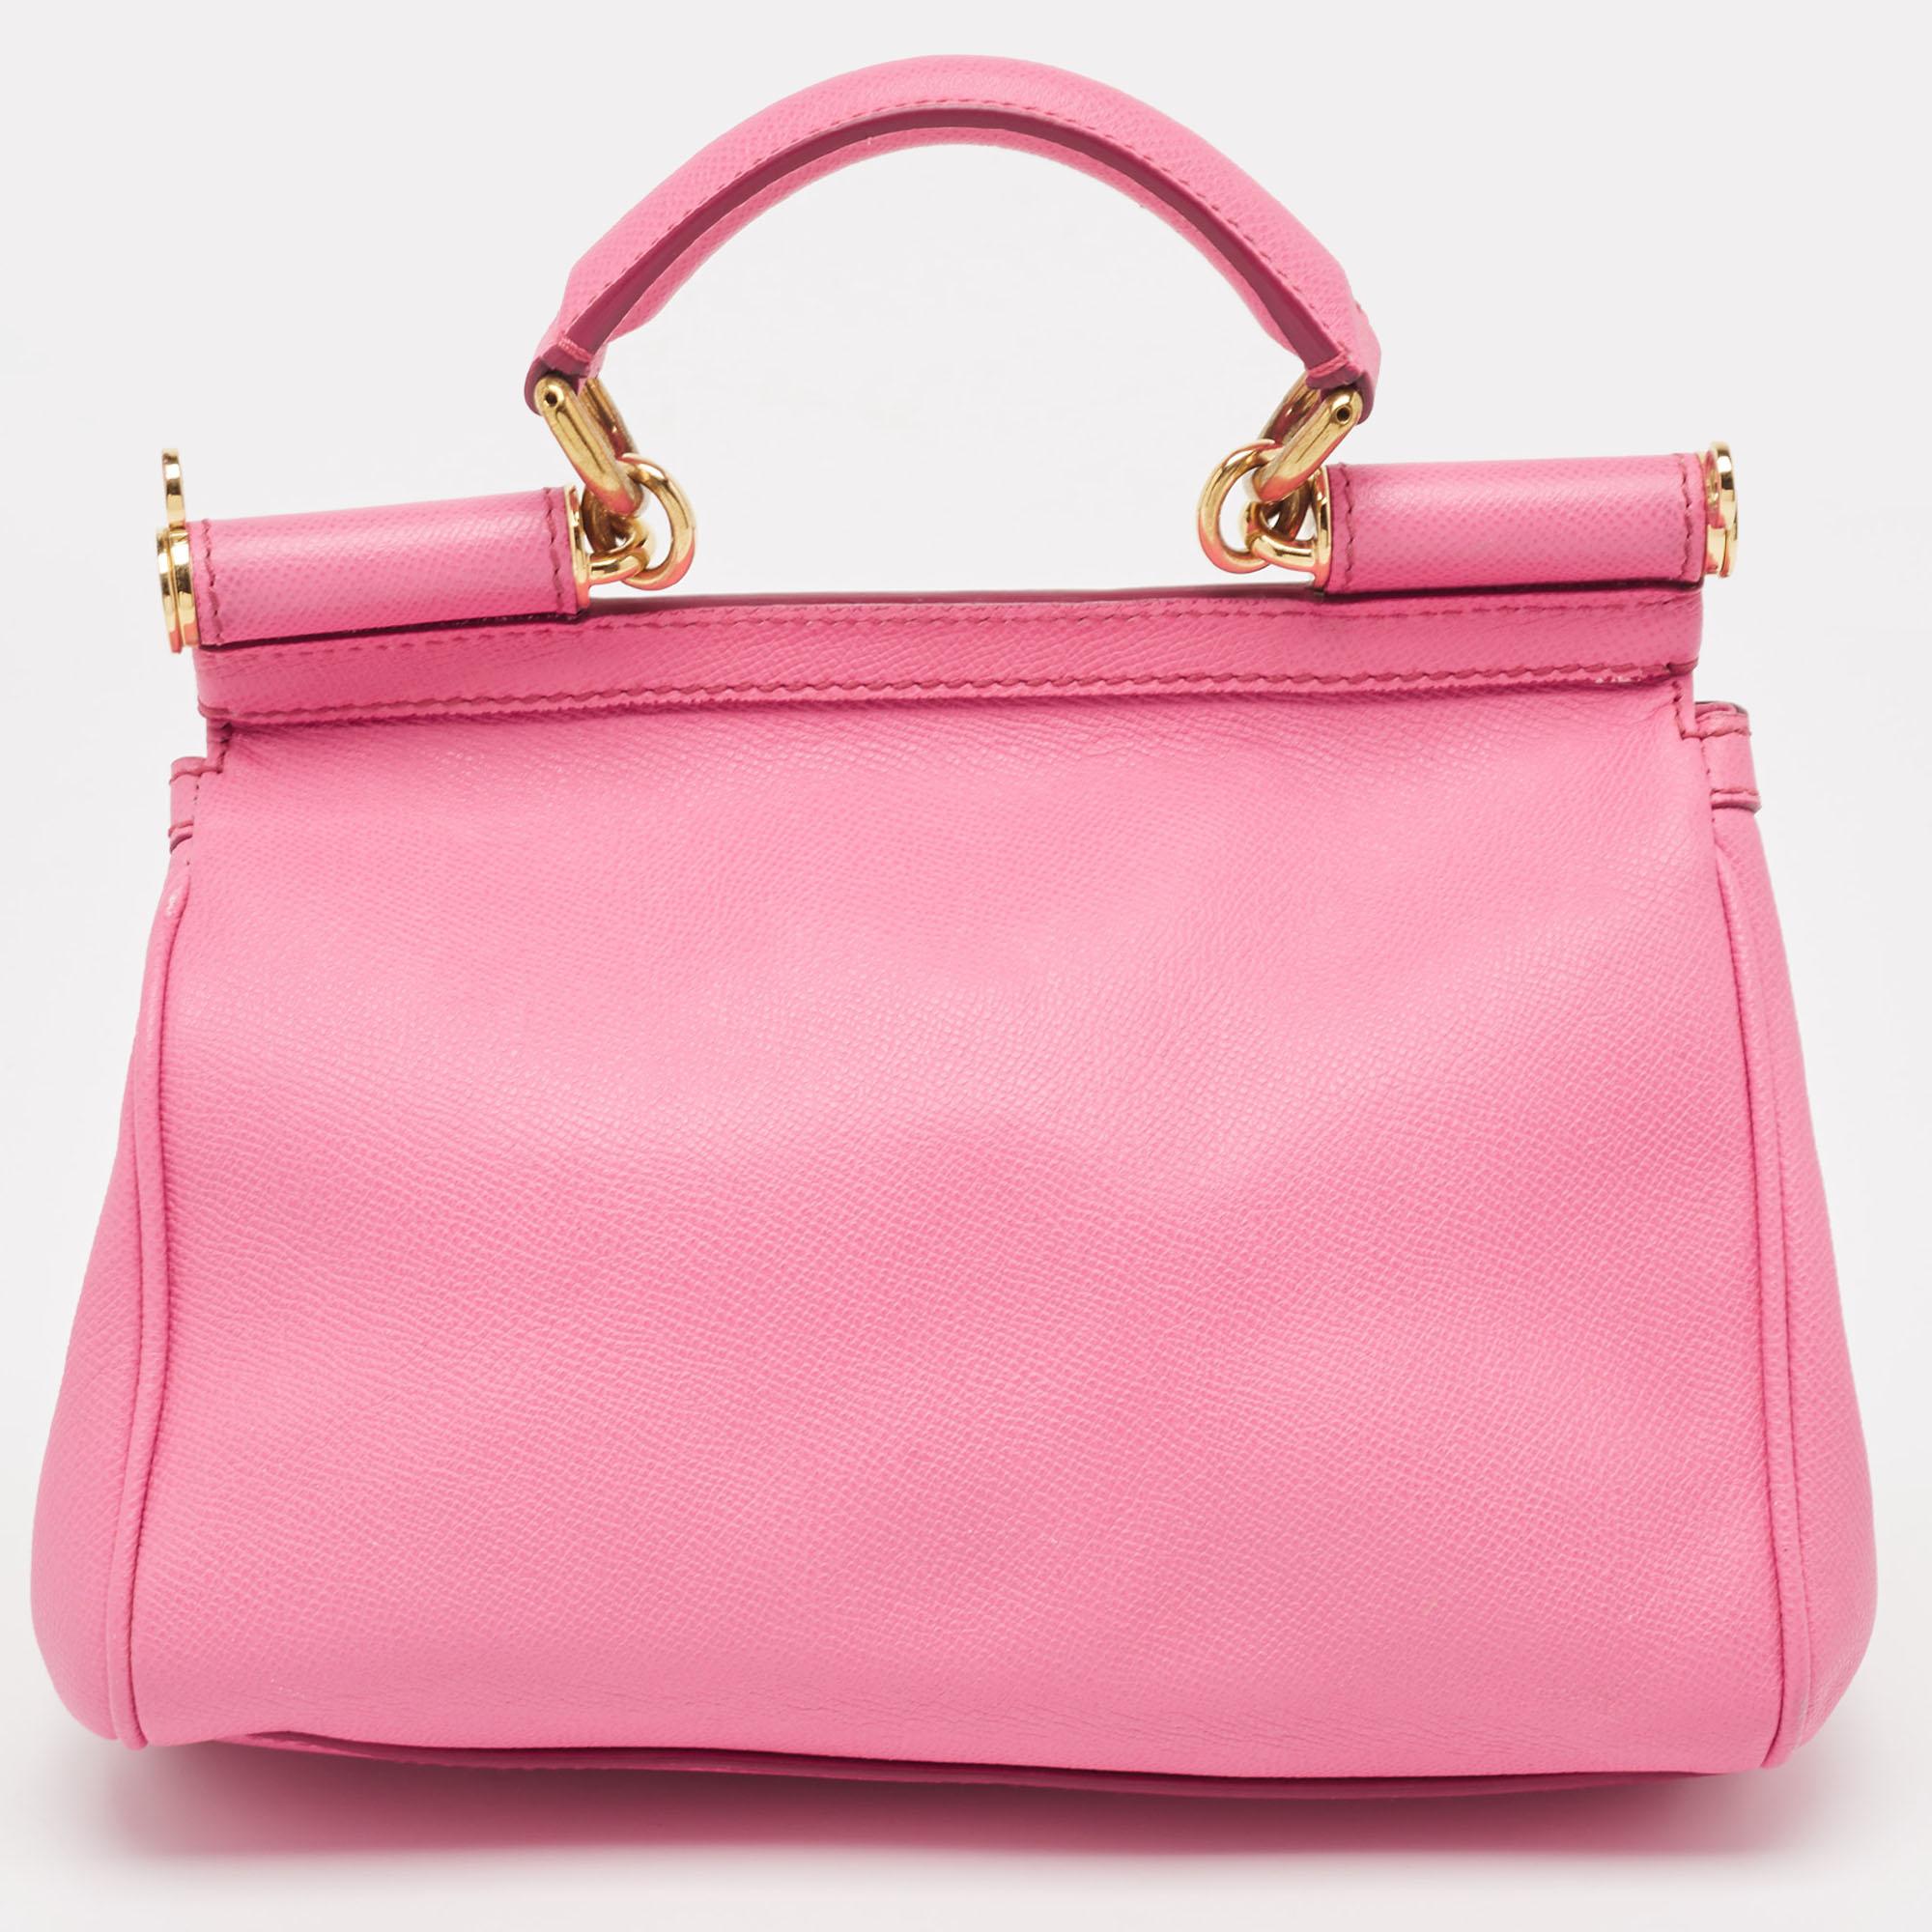 Presented for the 2009 Fall/Winter collection, Miss Sicily from Dolce & Gabbana represents the brand's regard for Italian essence and feminine style. This pink creation comes made from leather and can be carried conveniently by dual top handles.